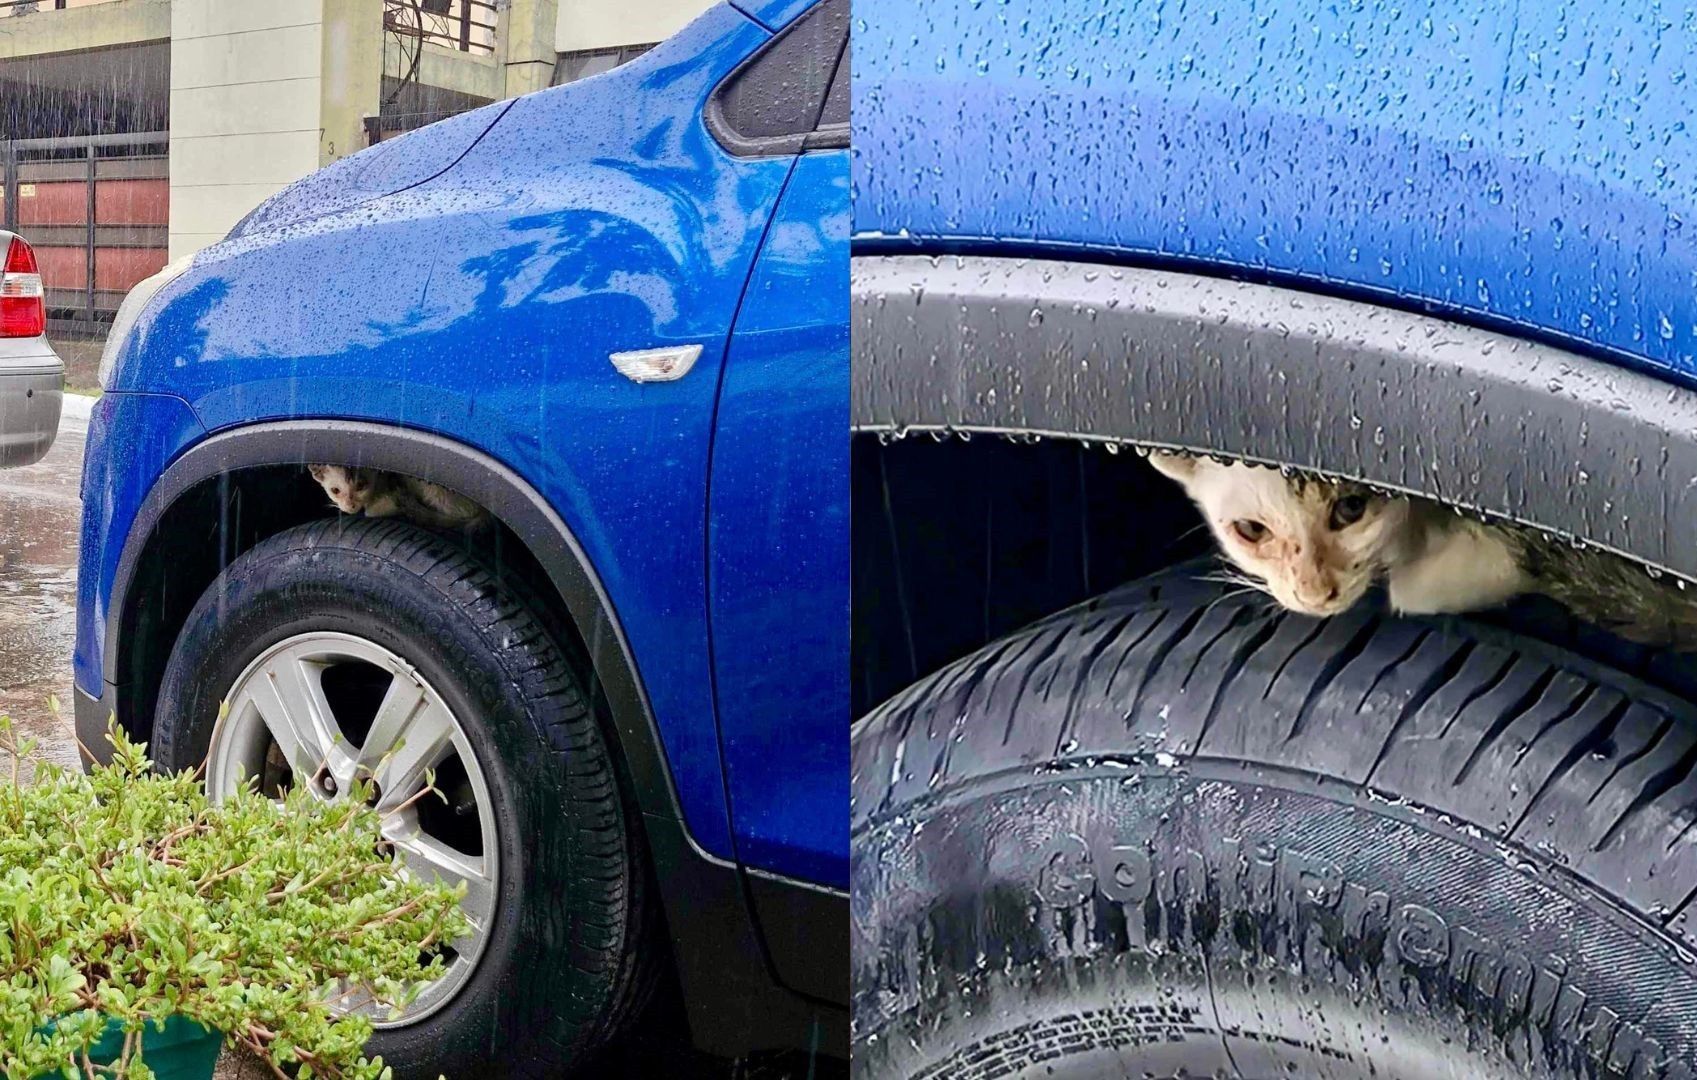 PAWS advises public to check cars for strays